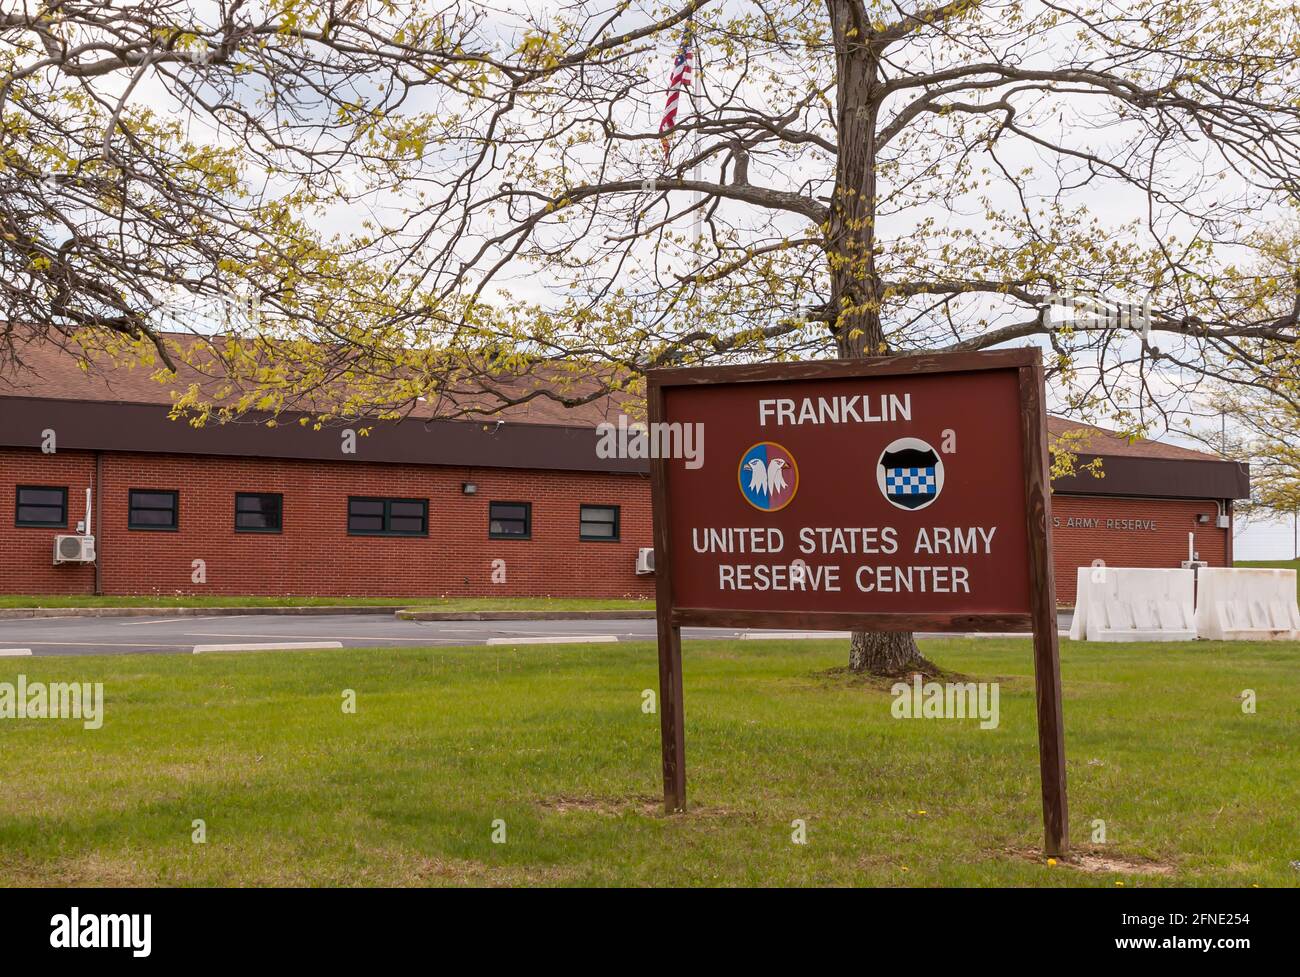 The Franklin United States Army Reserve Center sign and building in Franklin, Pennsylvania, USA Stock Photo